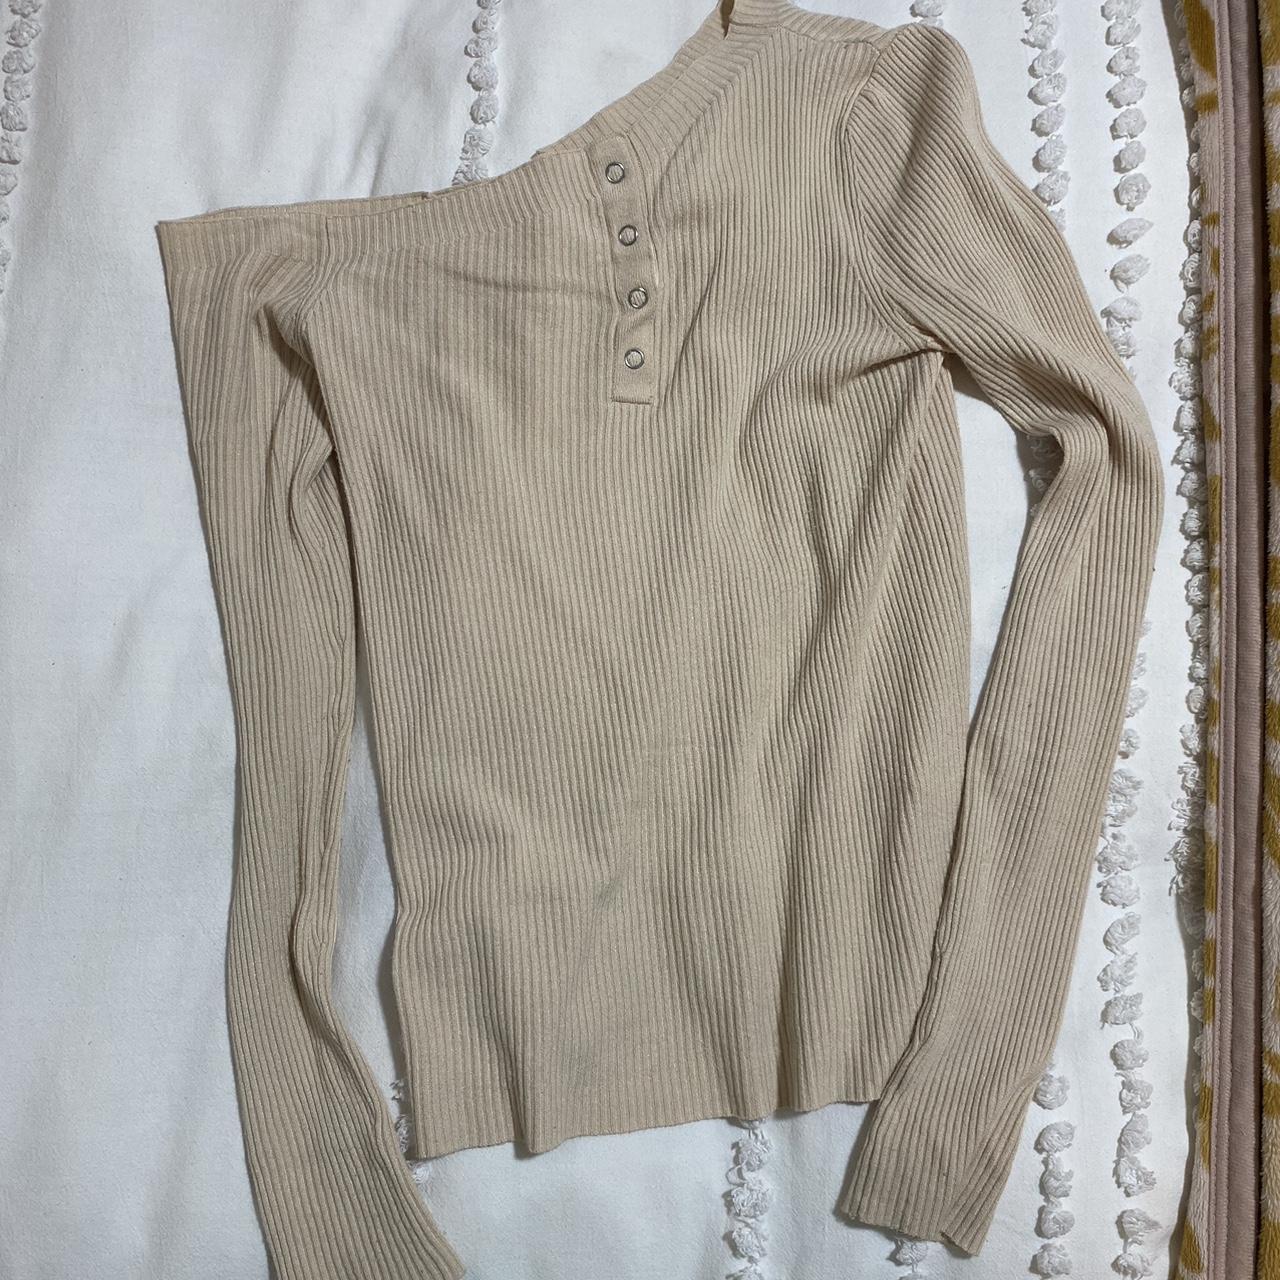 Henne Argo rib top! Love this I have it in other... - Depop